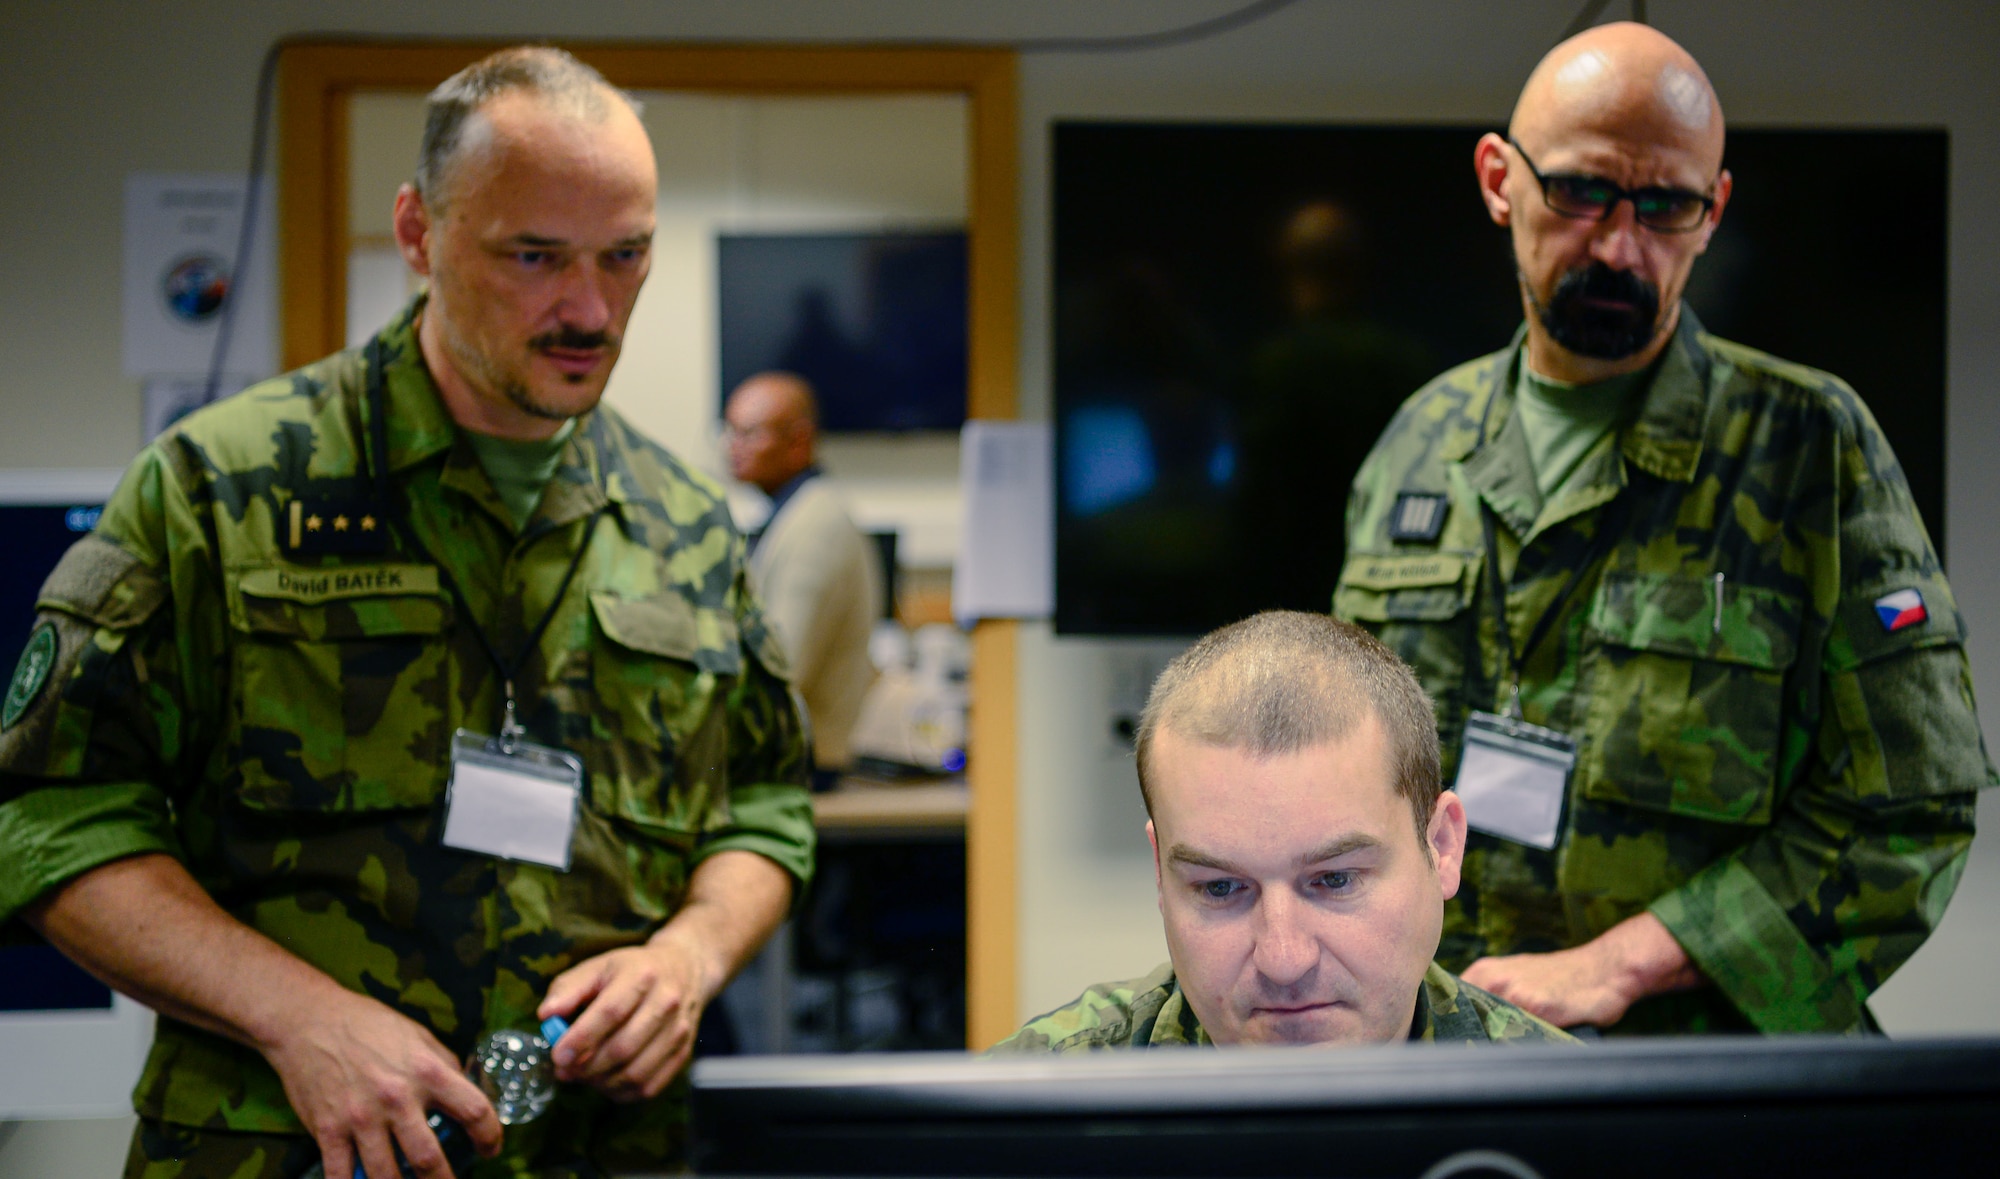 Czech Republic airmen analyze data on a computer during exercise Unified Vision 2023 at Ramstein Air Base, Germany, June 22, 2023. Unified Vision exercises have been taking place every three years since 2012, with each iteration expanding on the previous exercise and advancing training objectives. This year’s exercise was designed to assess the status of the current development of NATO’s joint intelligence, surveillance and reconnaissance capabilities.